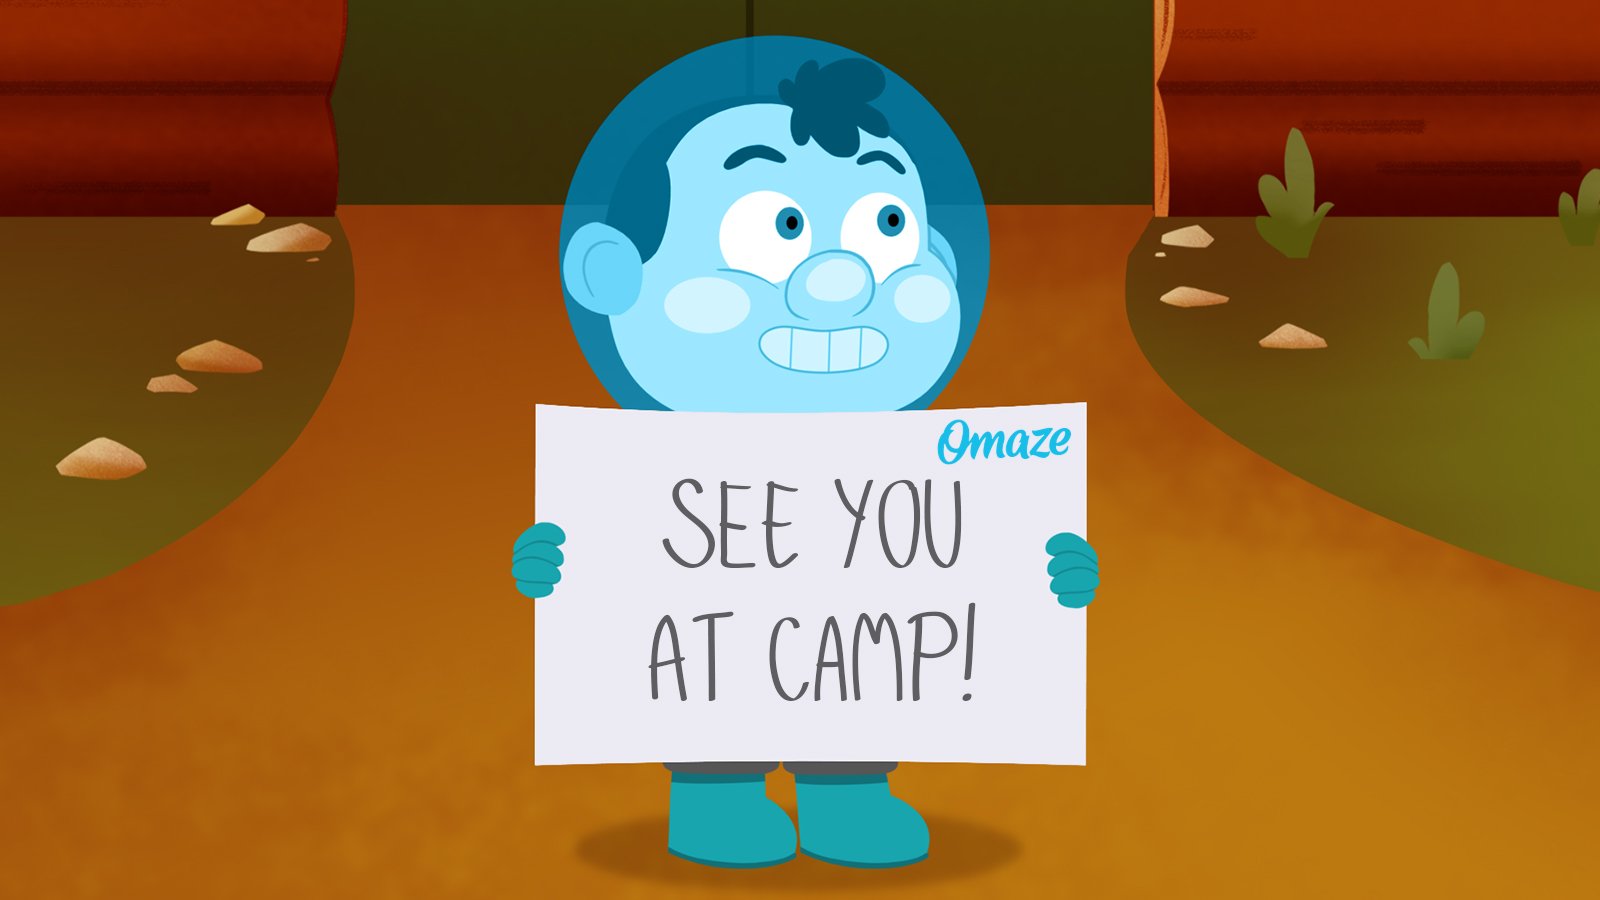 Be Drawn Into Rooster Teeth's® Camp Camp and Hang at Their Headquarter